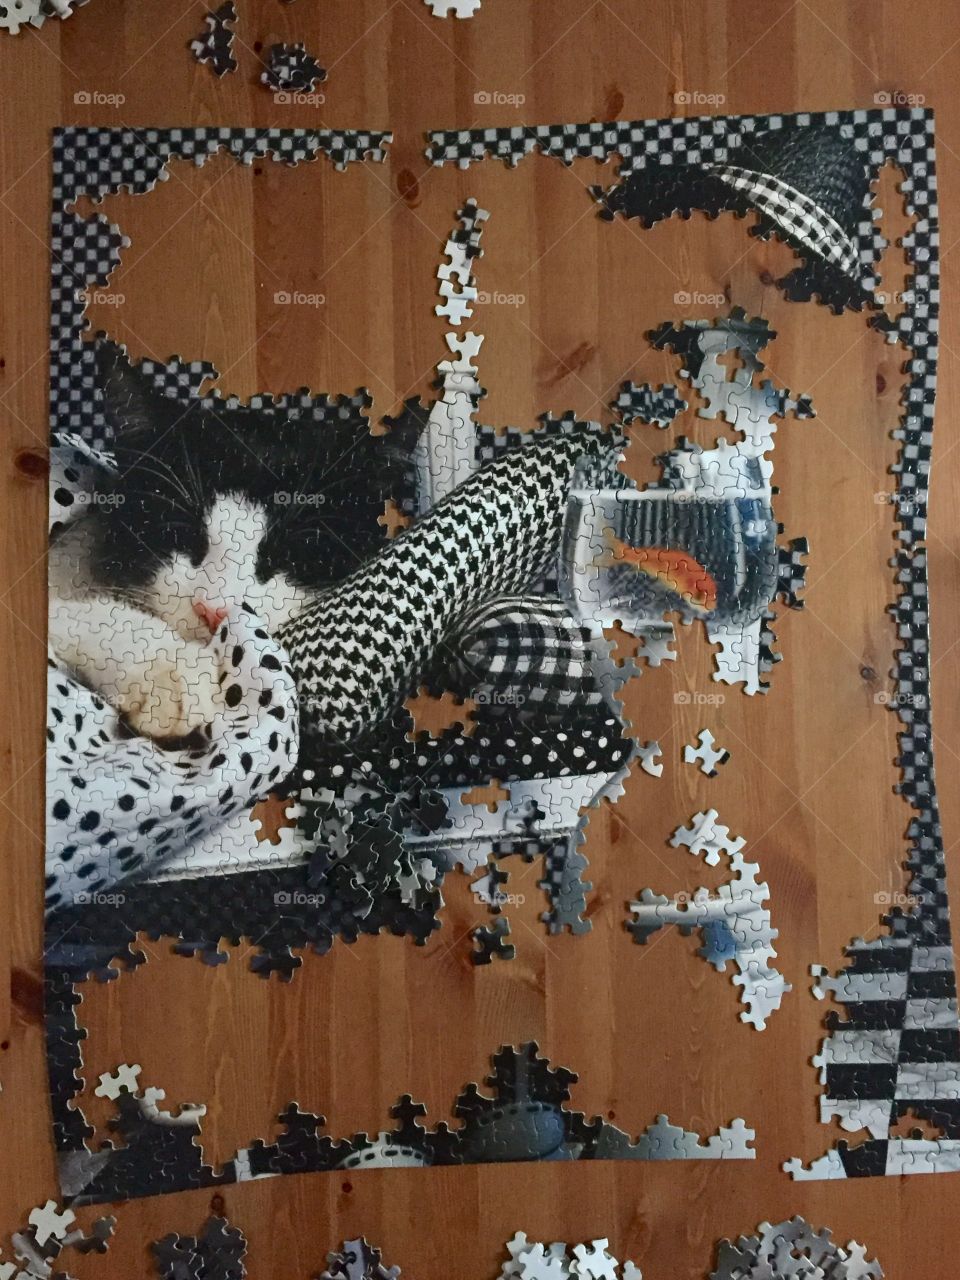 Unfinished kitty puzzle